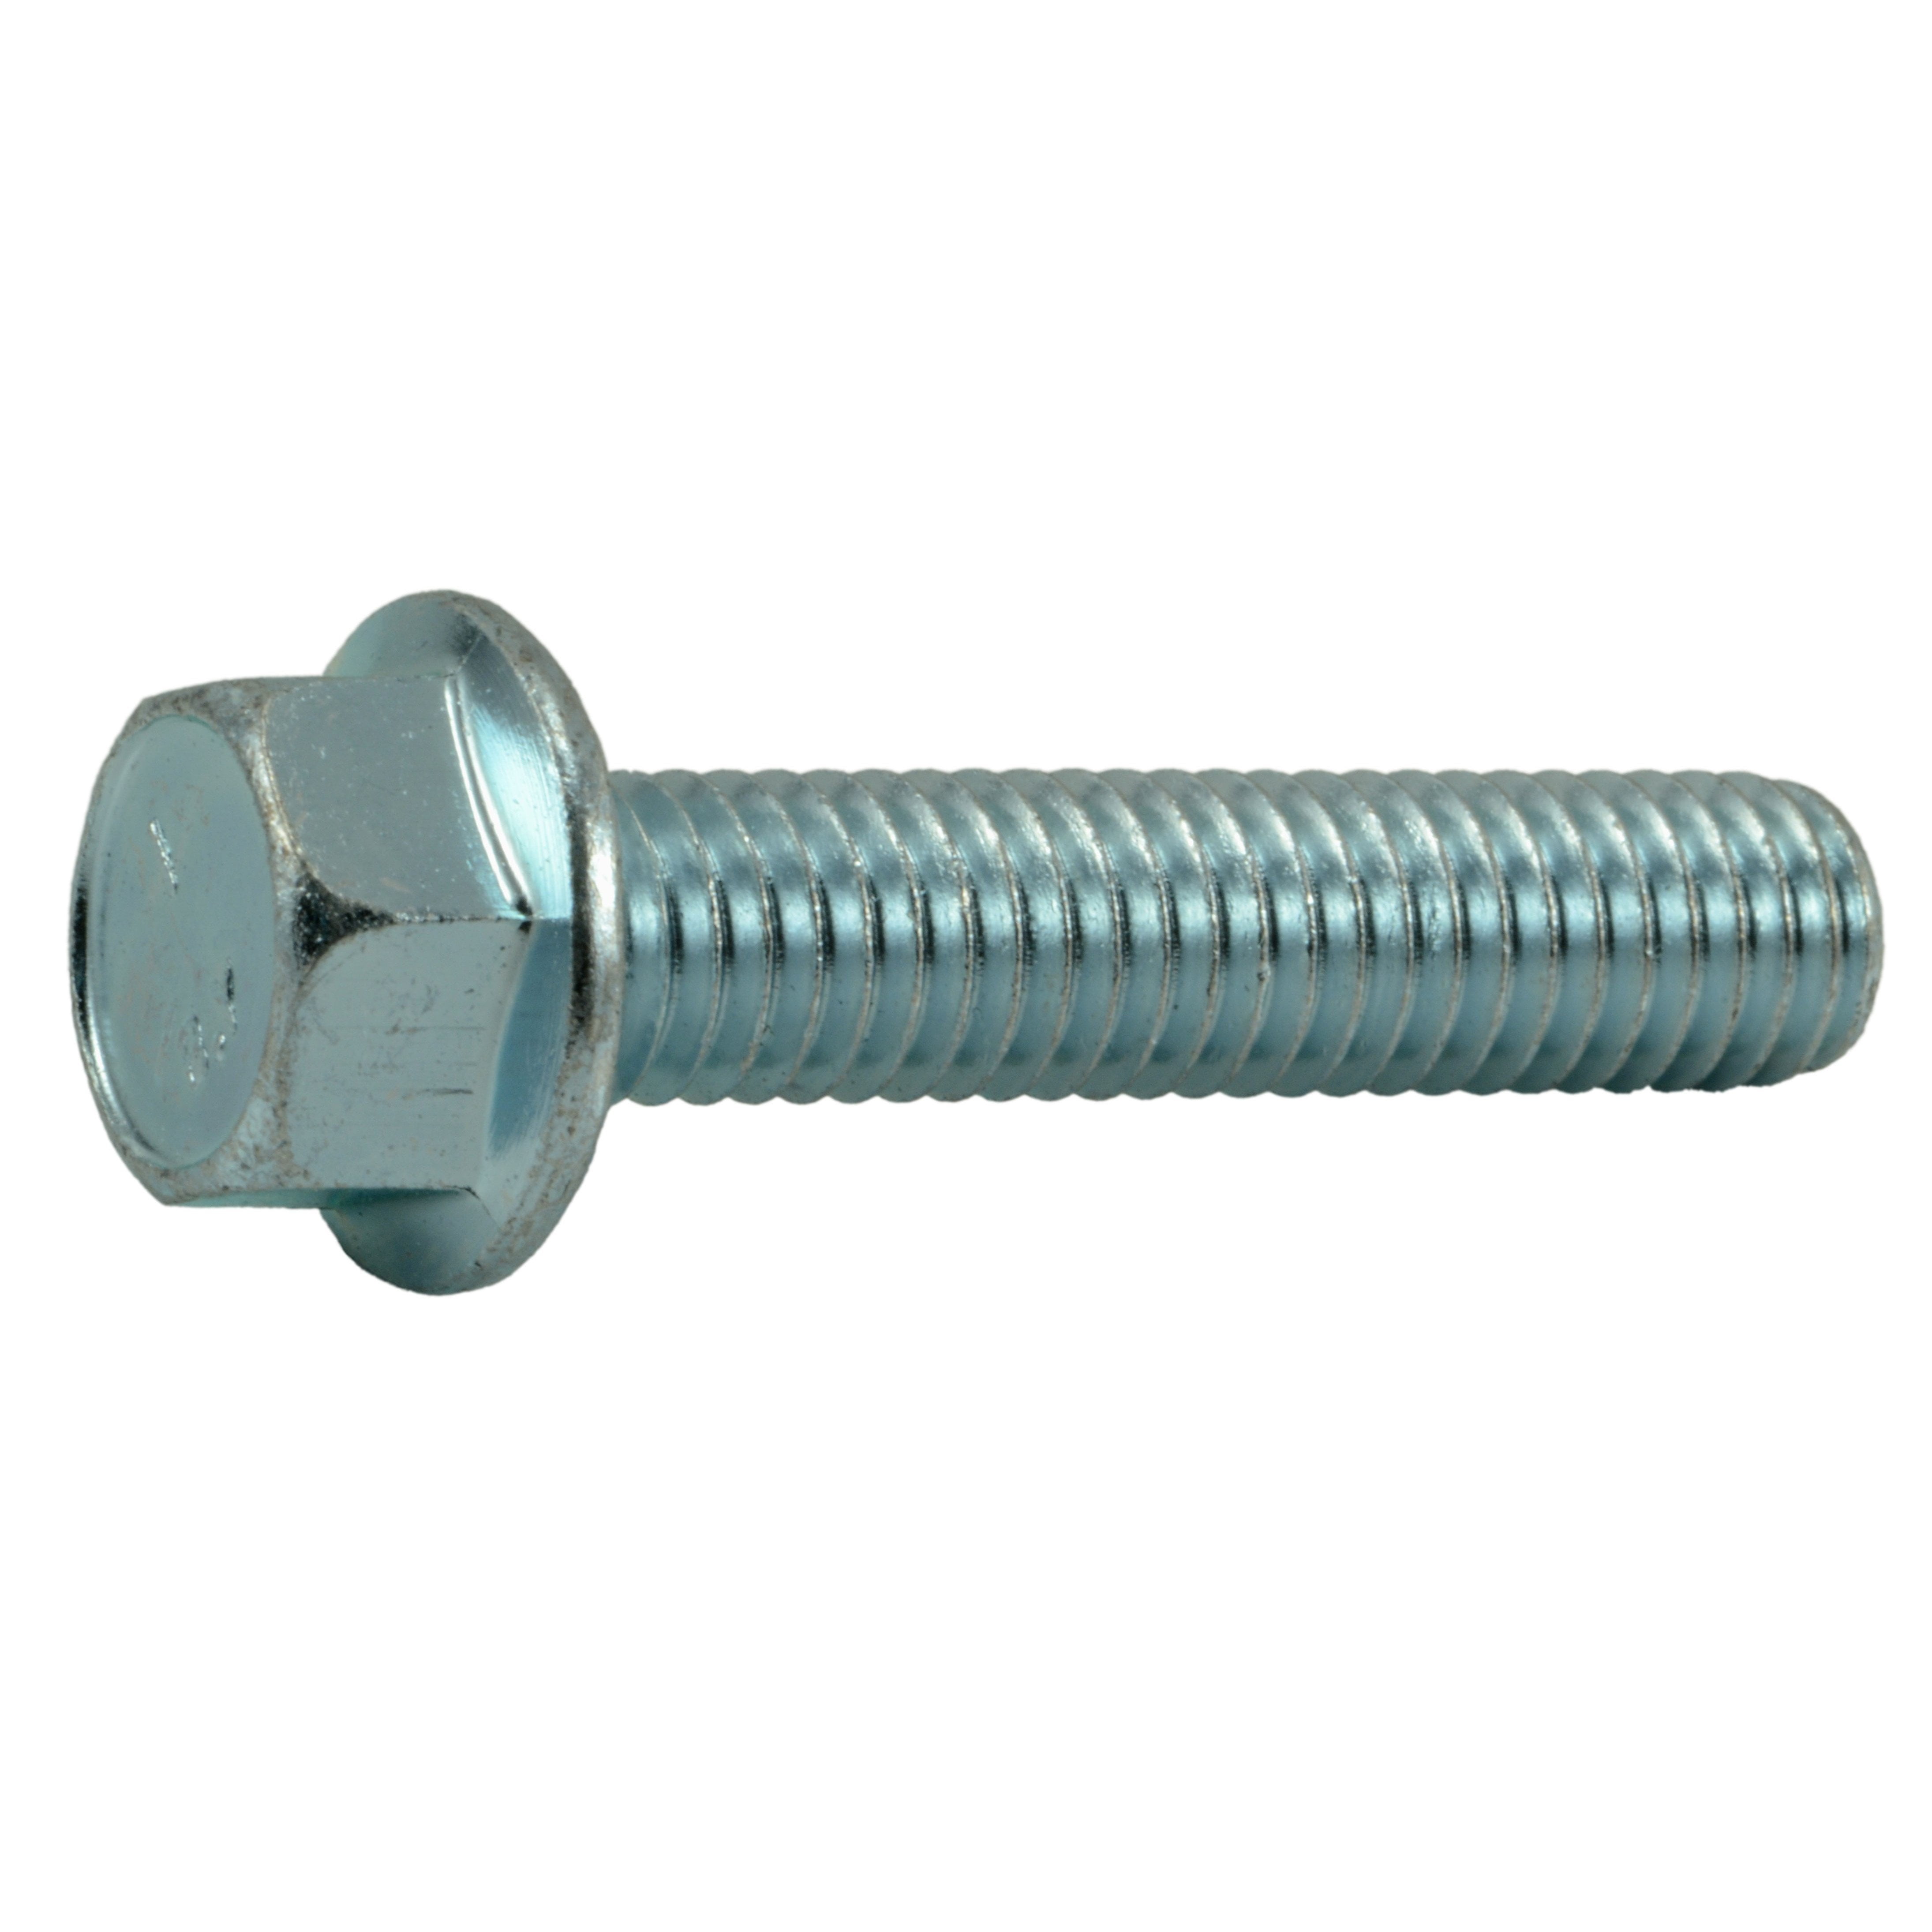 6,8,10,1/4,5/16,3/8,7/16,1/2,5/8,3/4 ZINC PLATED STEEL HEX SERRATED FLANGE NUTS 